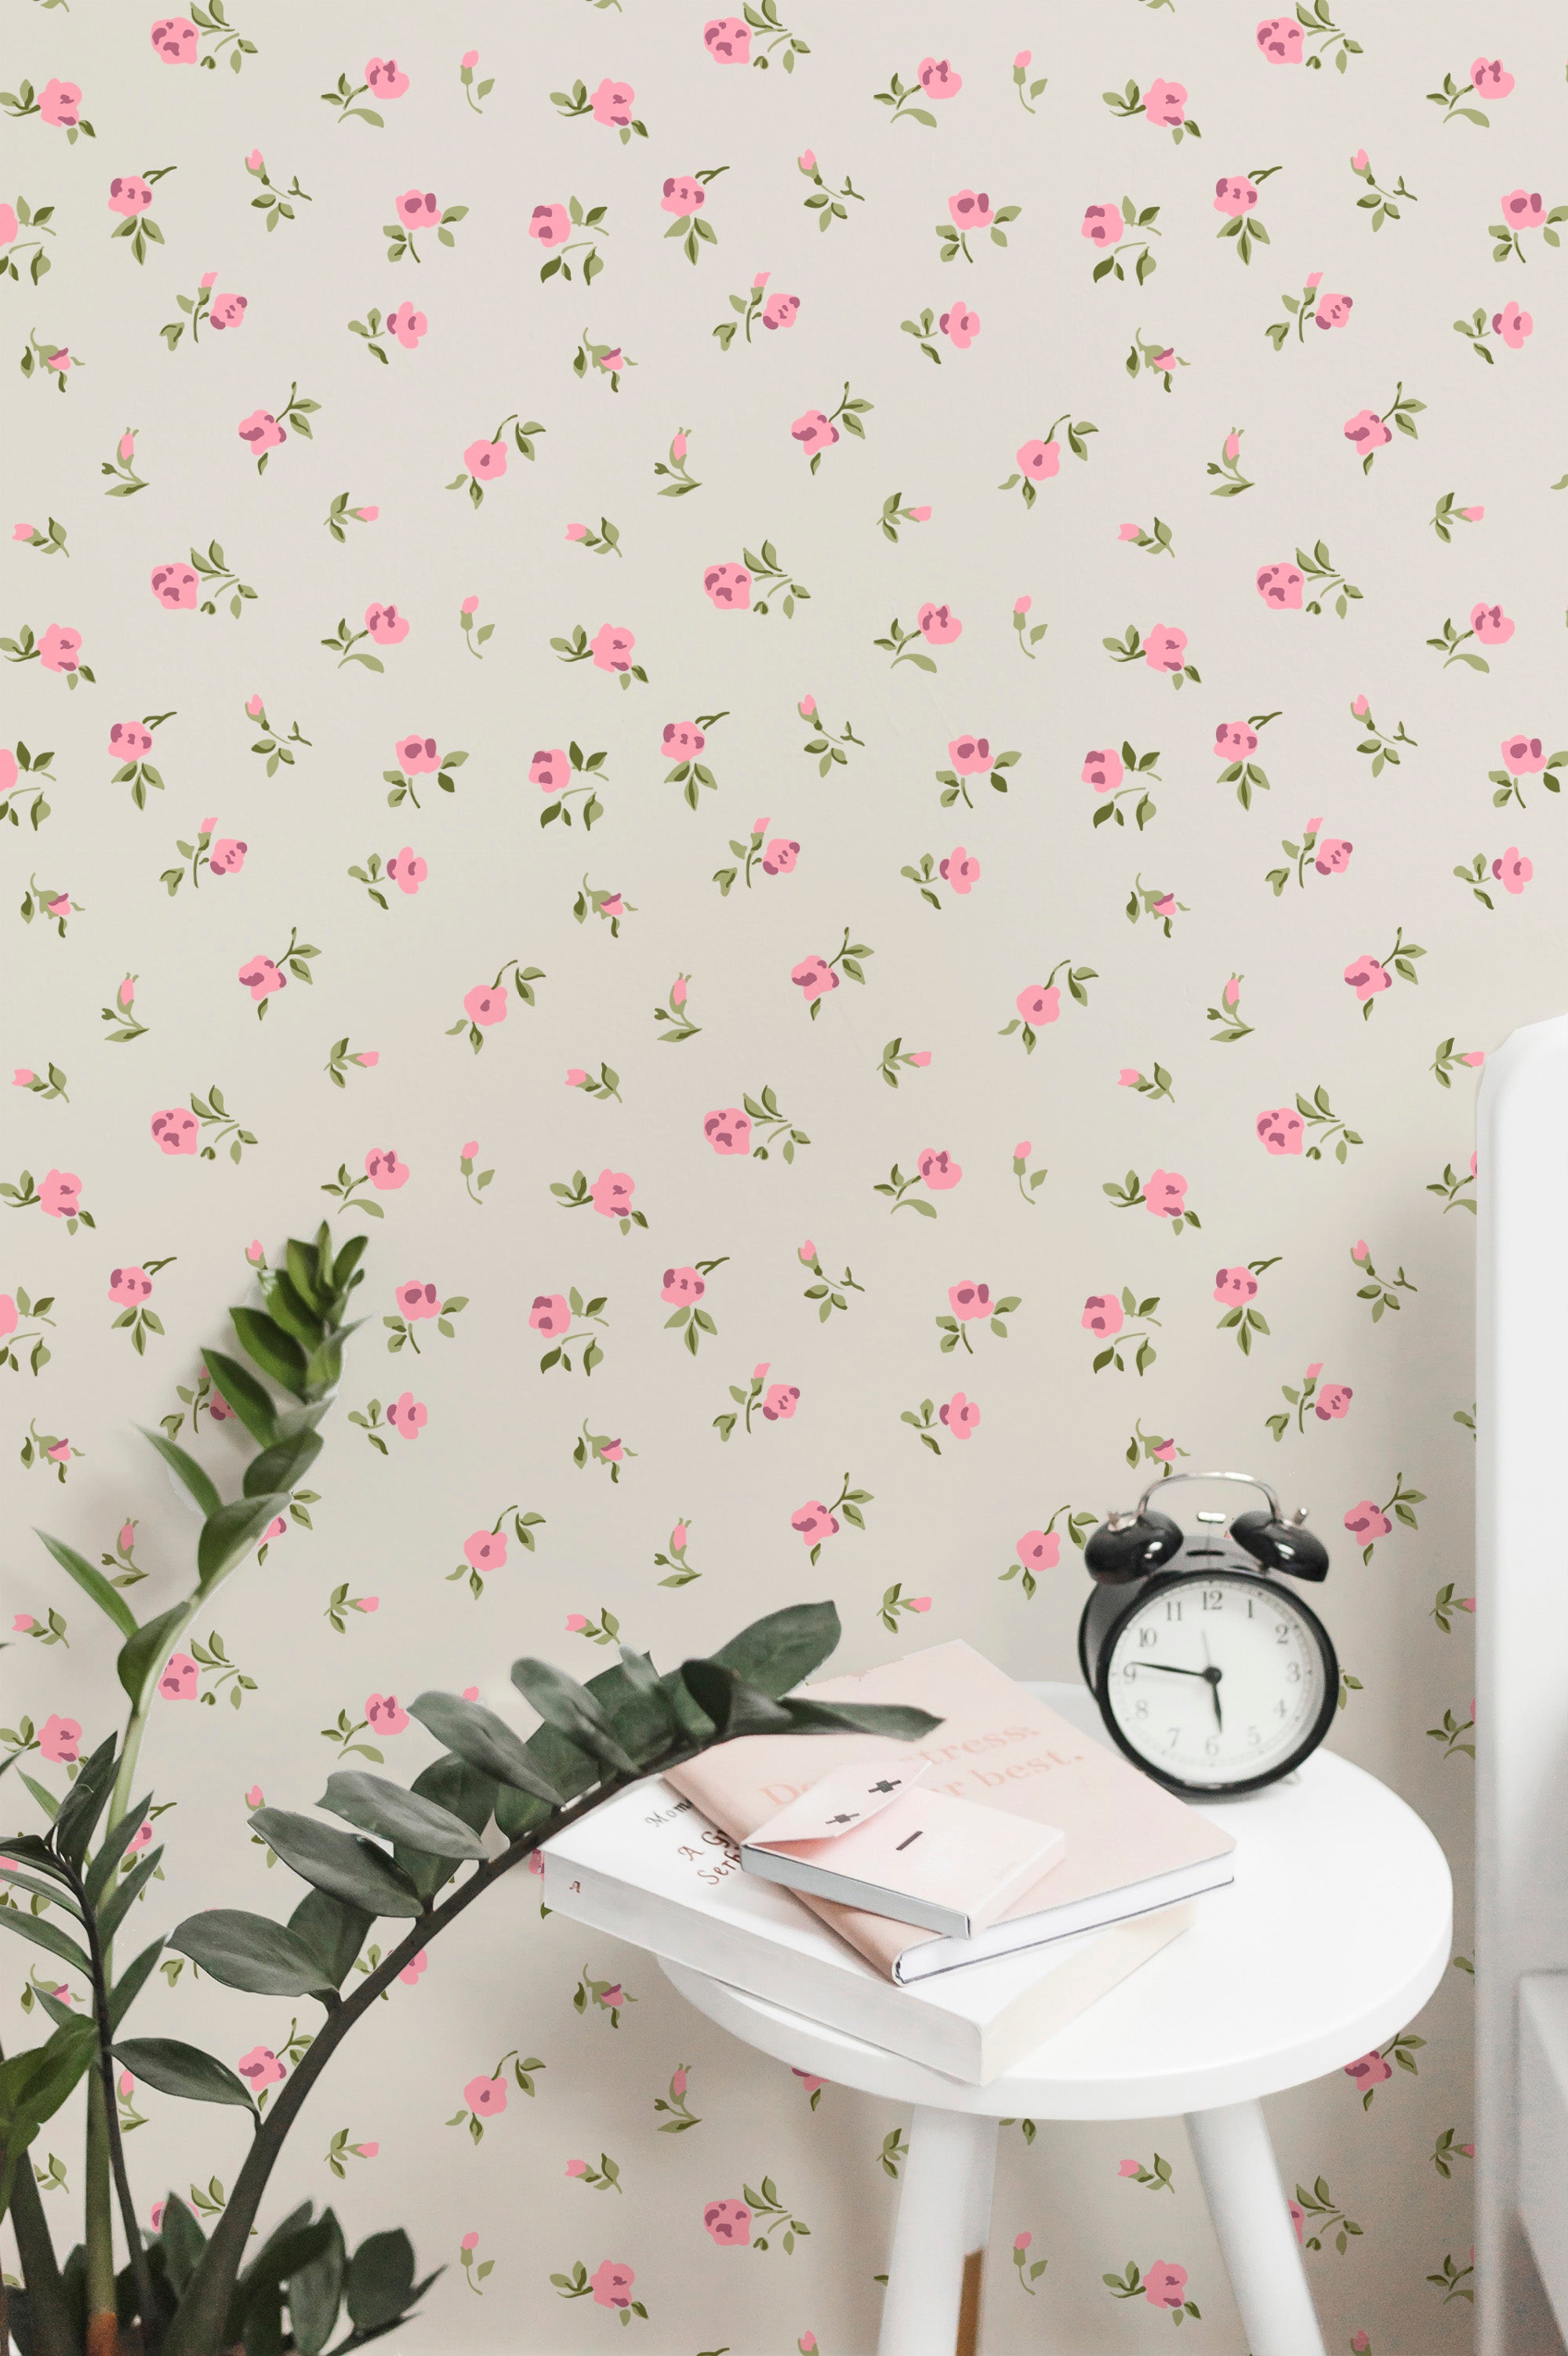 A refreshing and lively workspace featuring the Flora Wallpaper, adorned with small, vibrant pink blossoms and lush green leaves on a pale cream background. The setting includes a white side table with a stack of books and a vintage-style black alarm clock, complemented by indoor green plants for a touch of nature.